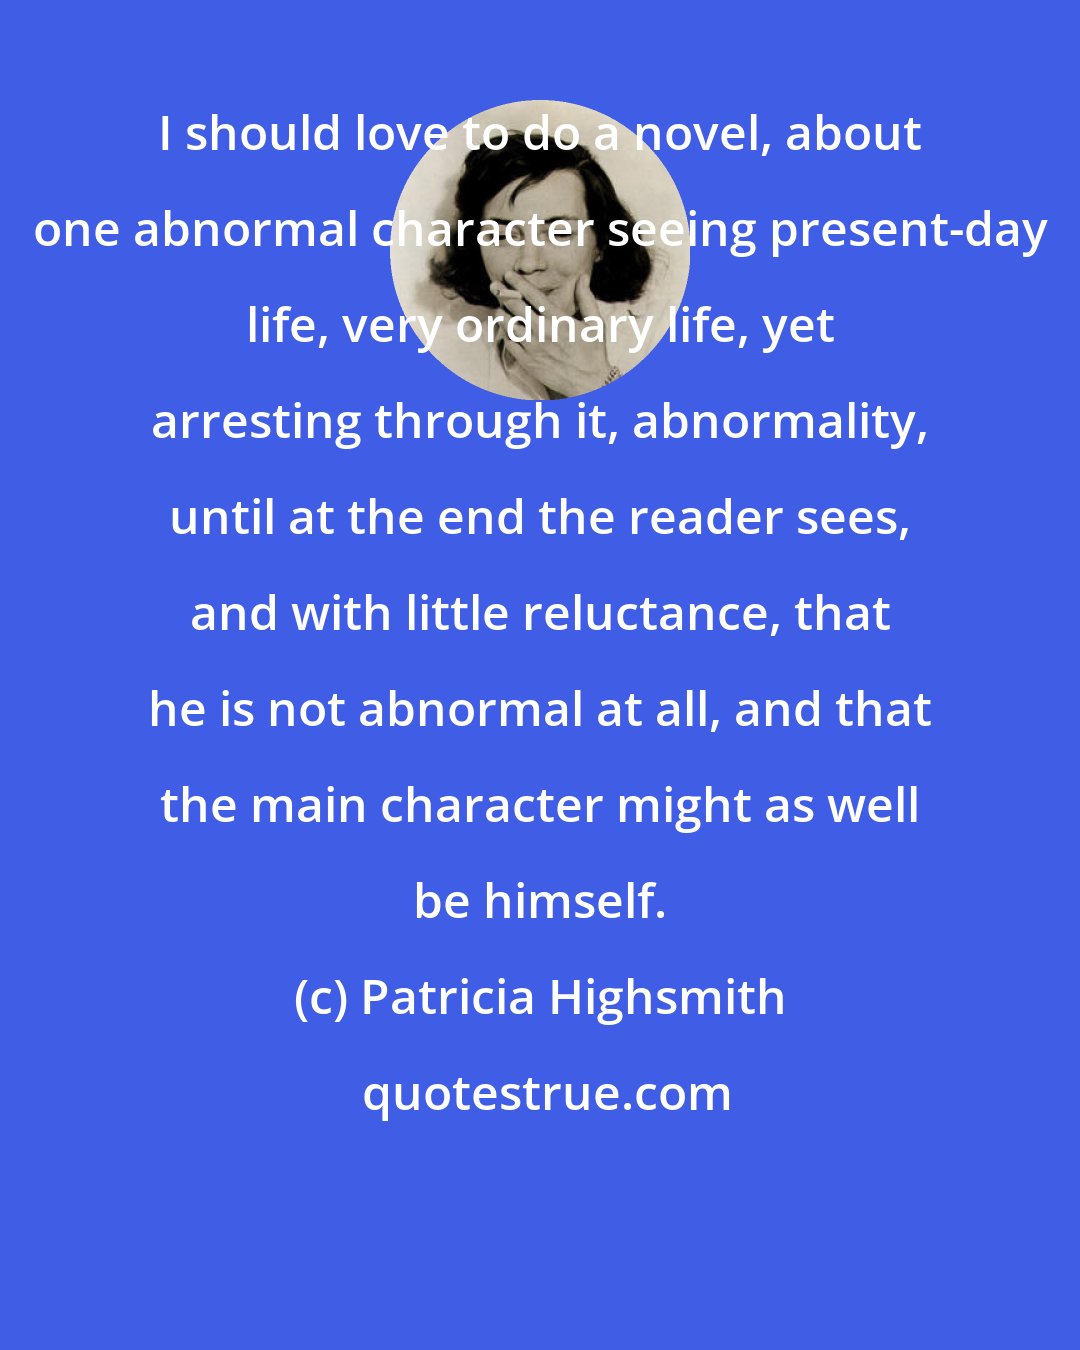 Patricia Highsmith: I should love to do a novel, about one abnormal character seeing present-day life, very ordinary life, yet arresting through it, abnormality, until at the end the reader sees, and with little reluctance, that he is not abnormal at all, and that the main character might as well be himself.